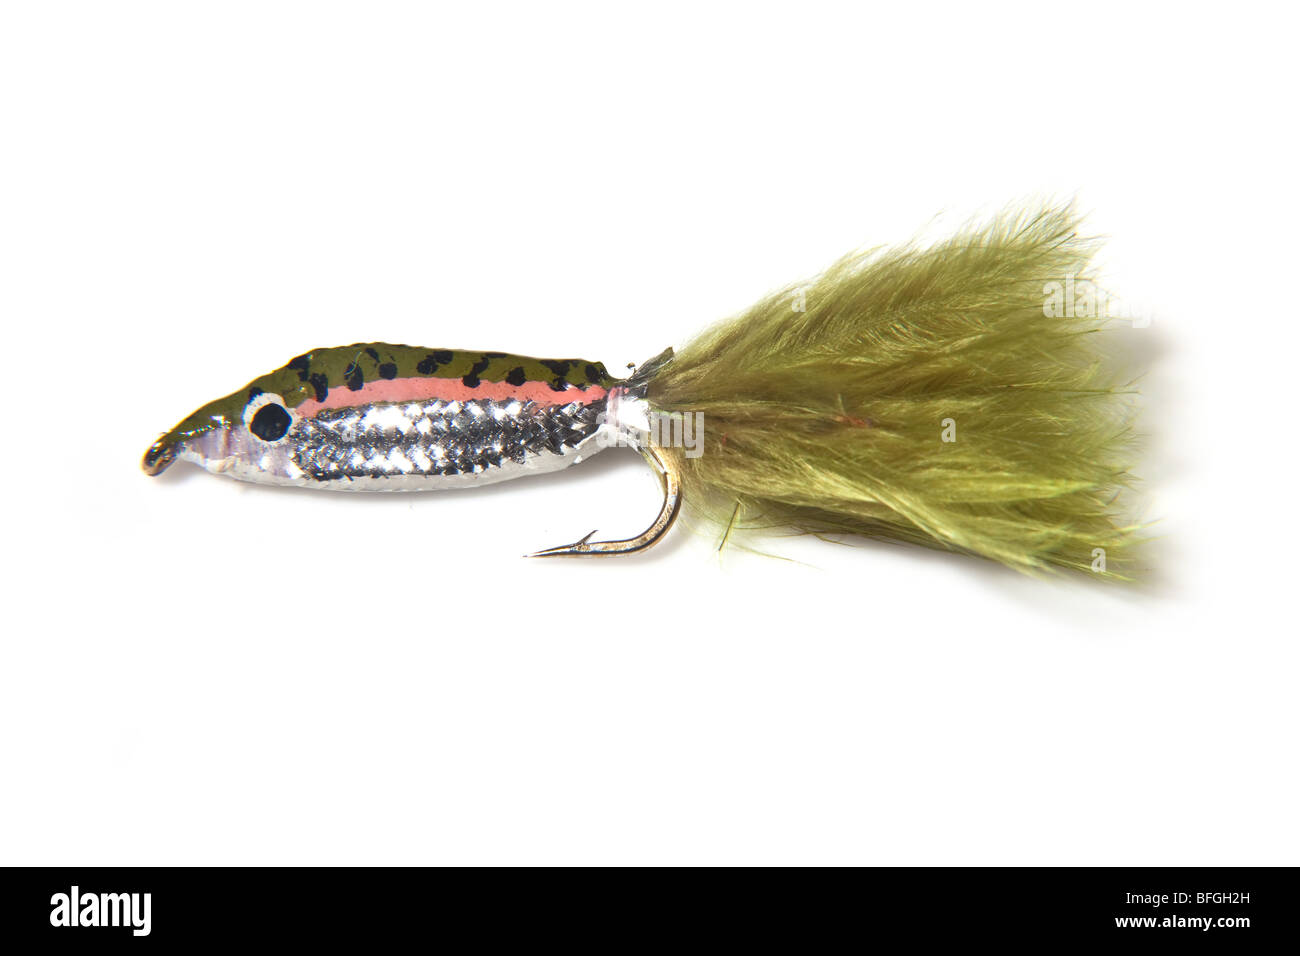 https://c8.alamy.com/comp/BFGH2H/fry-trout-lure-isolated-on-a-white-studio-background-BFGH2H.jpg